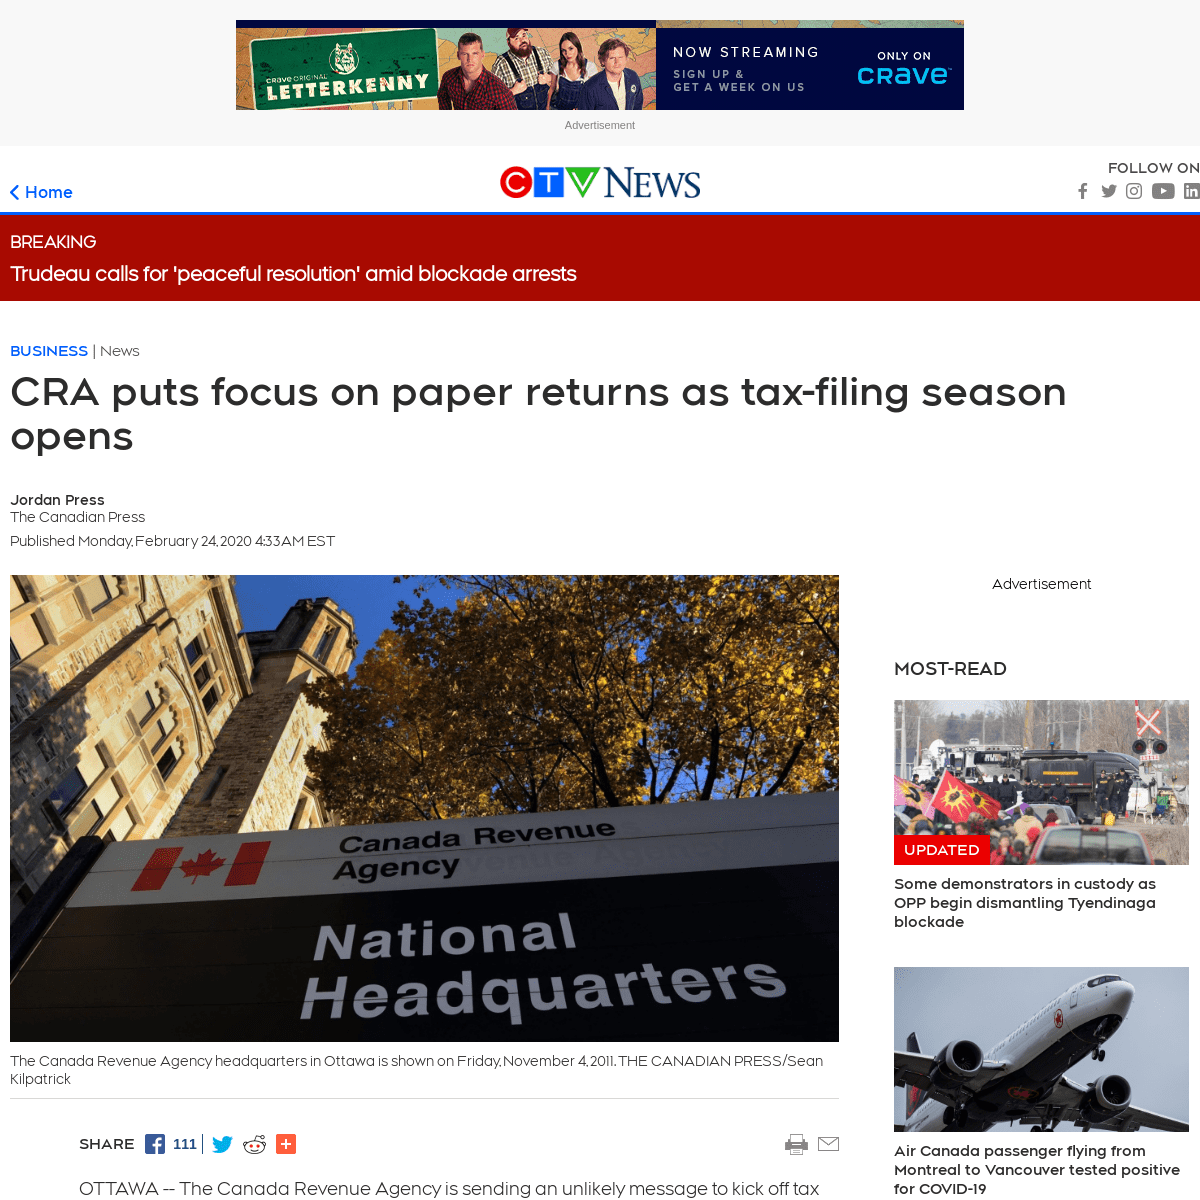 A complete backup of www.ctvnews.ca/business/cra-puts-focus-on-paper-returns-as-tax-filing-season-opens-1.4824545